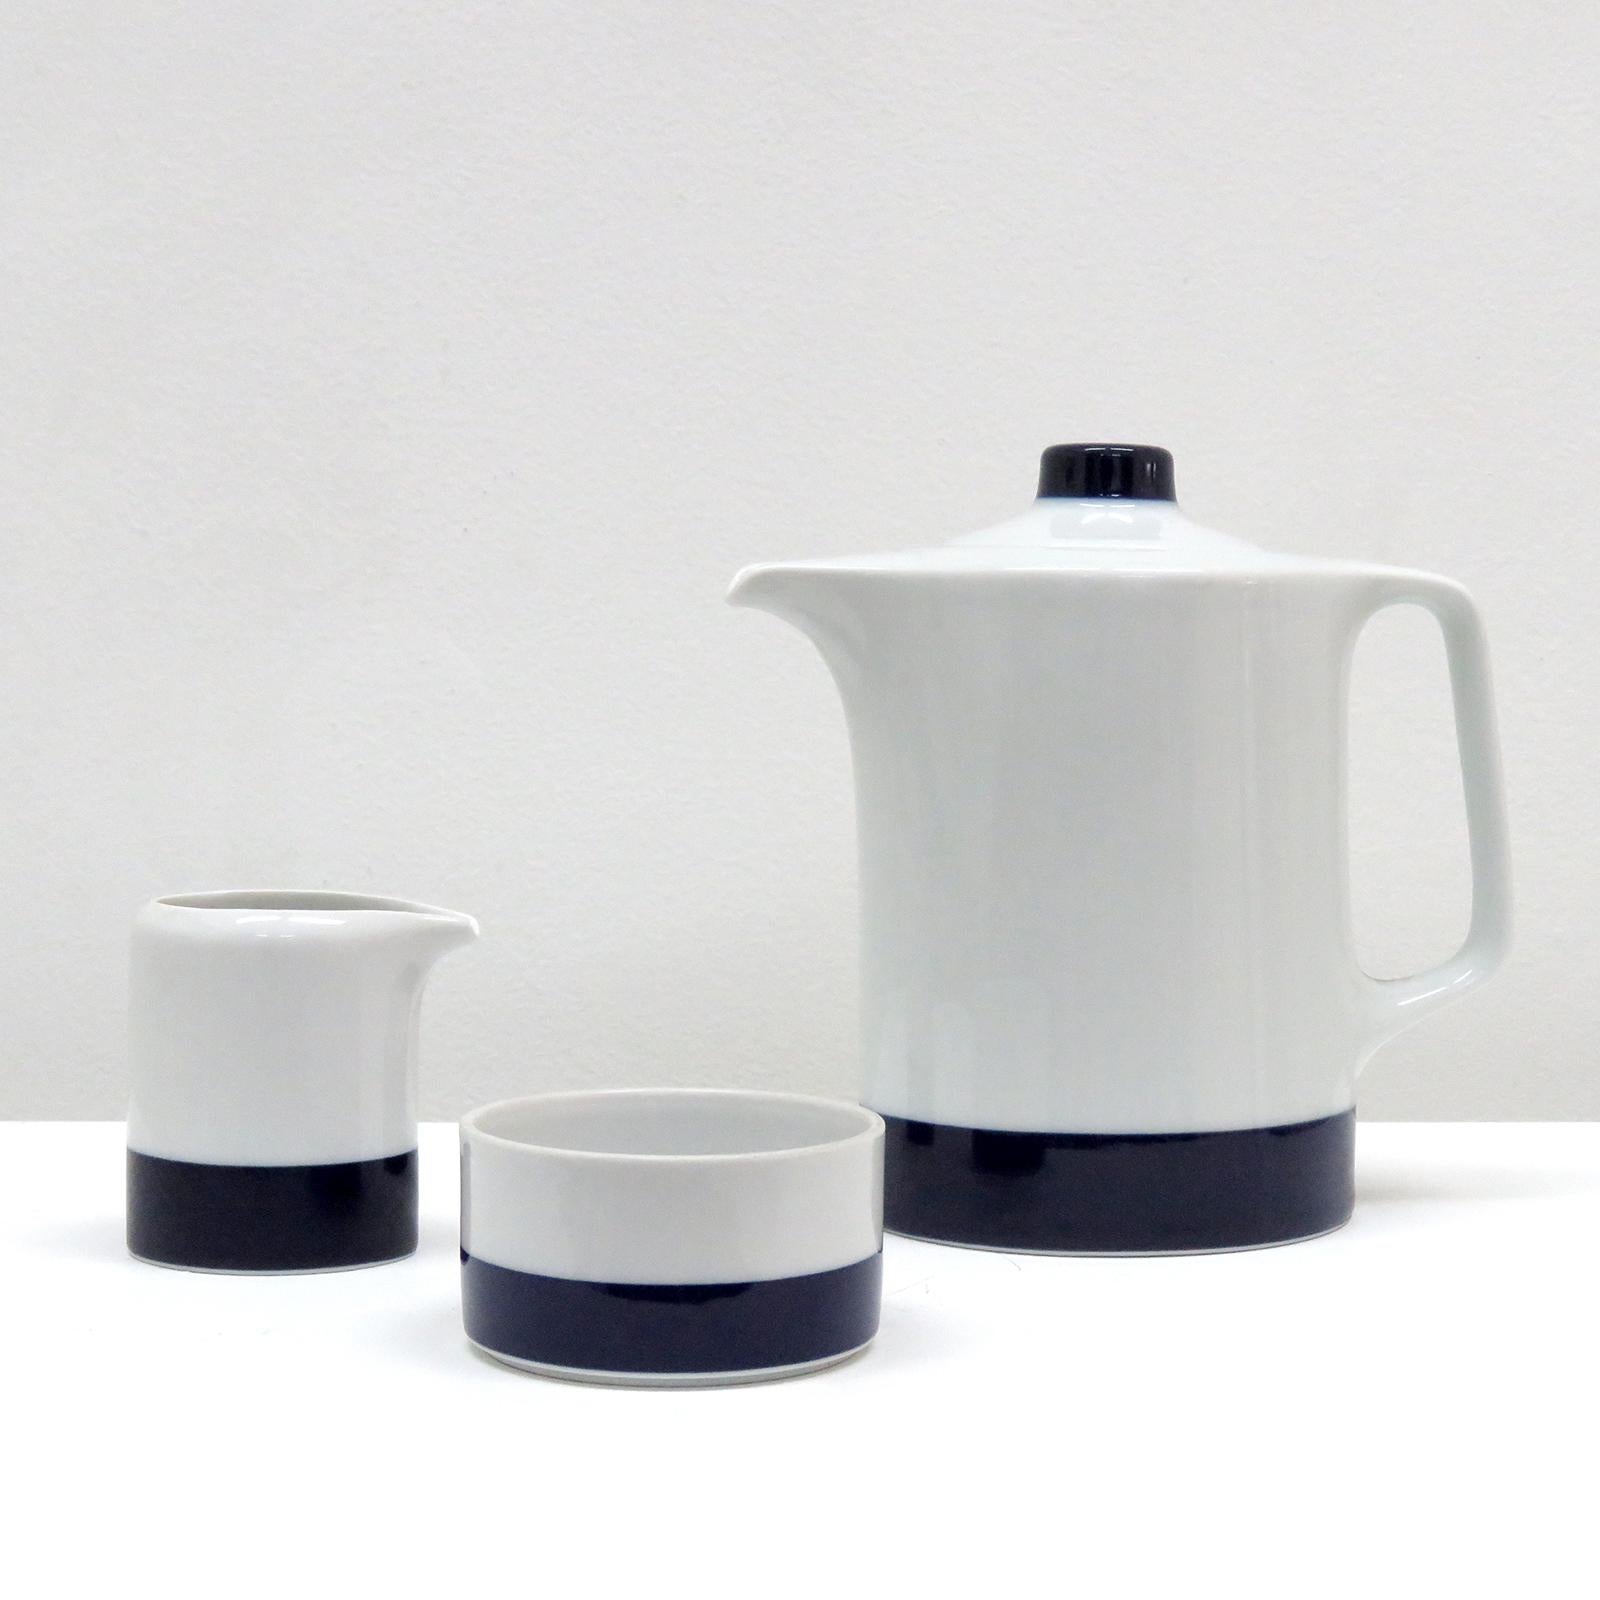 Minimalist three-piece porcelain coffee set 'Novum 65' by Hutschenreuther, Germany, cobalt blue/white, released between 1968 and 1970, marked.